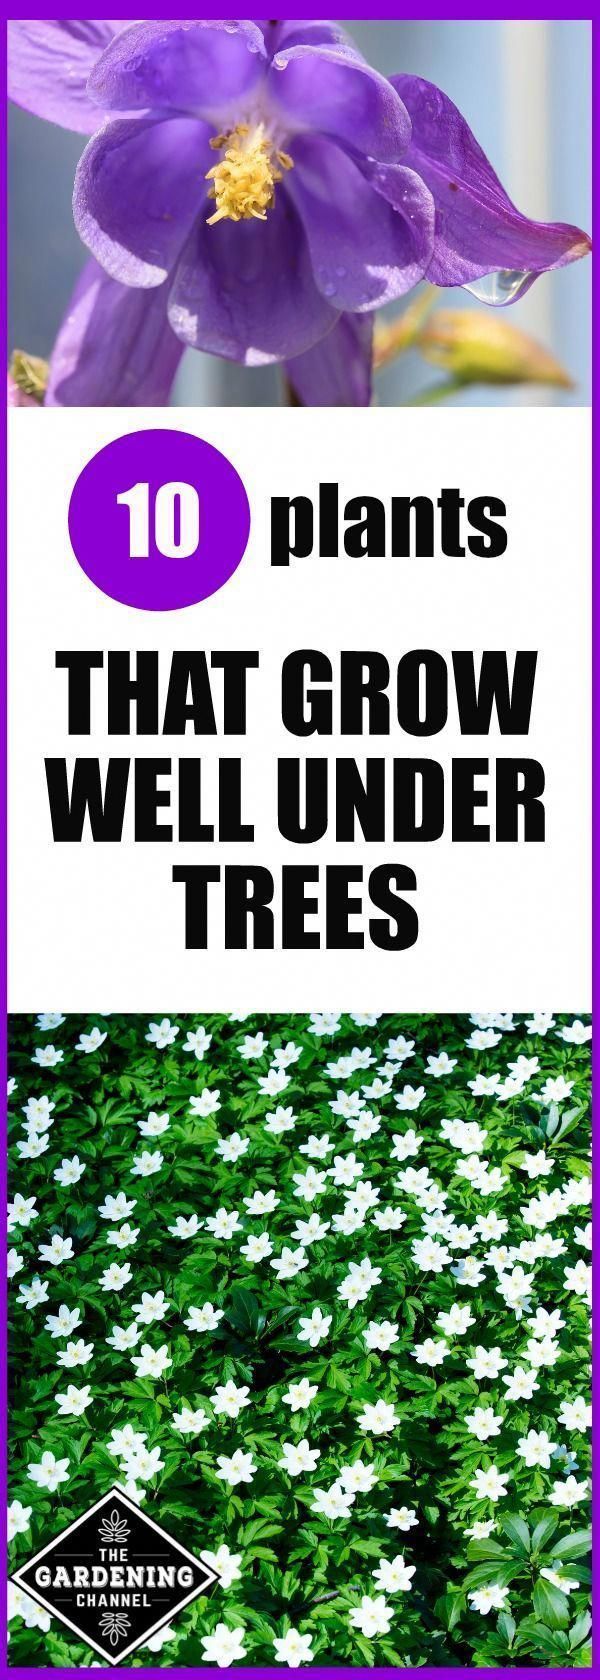 10 Plants That Grow Well Under Trees -   25 plants Growing backyards
 ideas